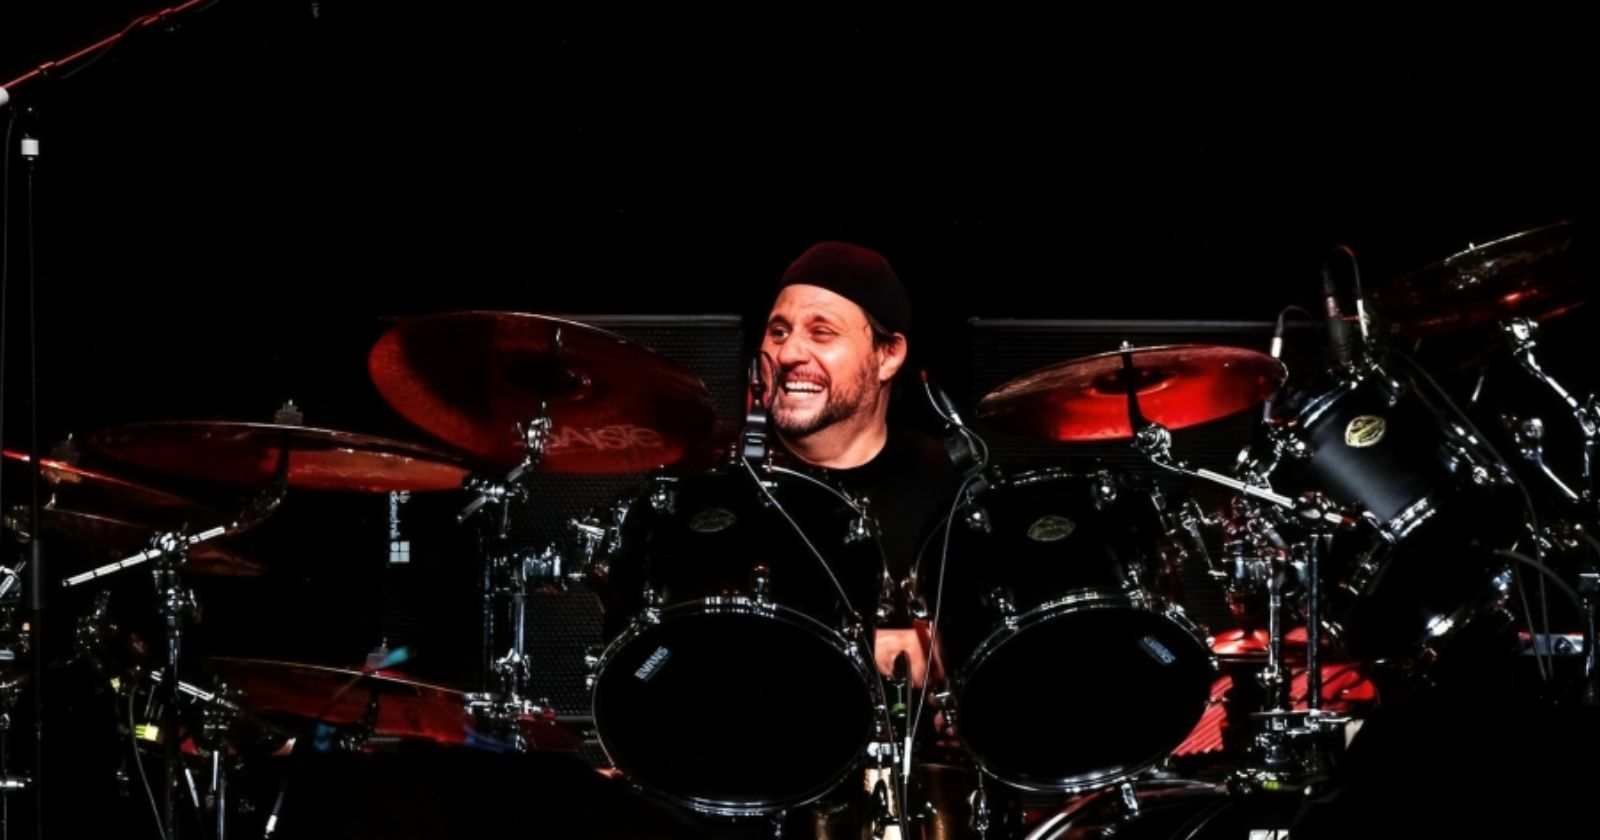 Dave Lombardo playing the drums